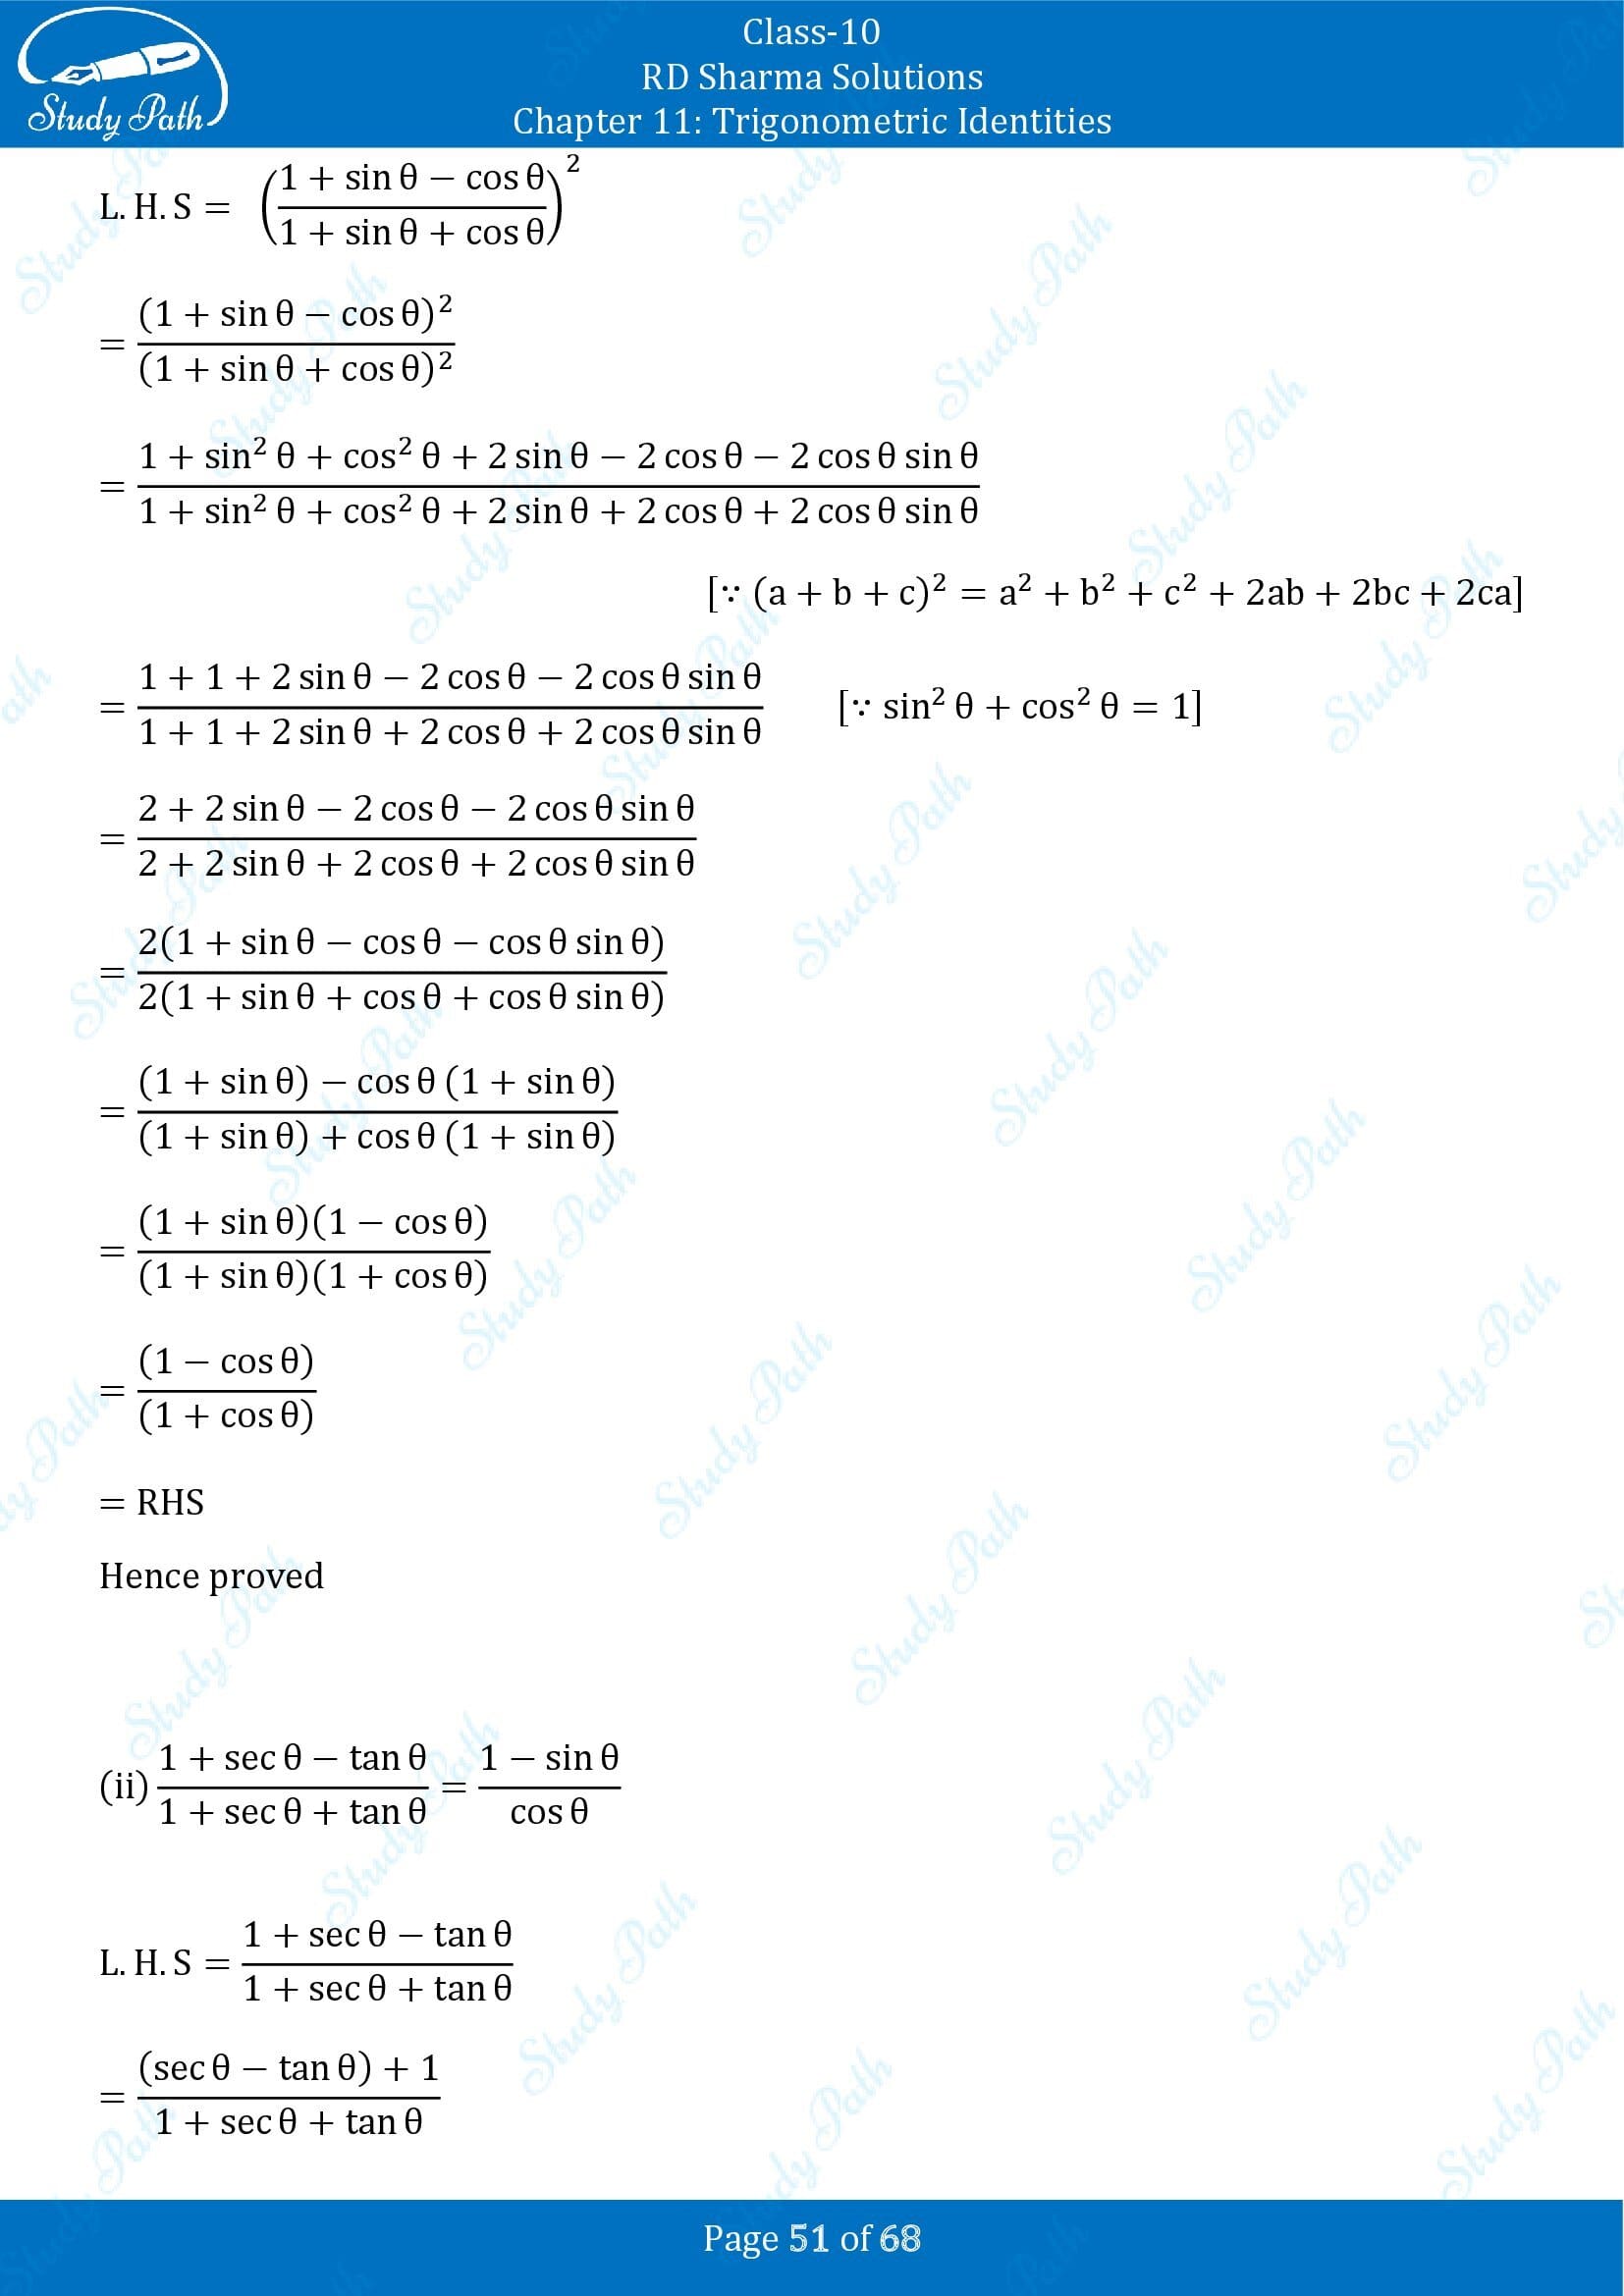 RD Sharma Solutions Class 10 Chapter 11 Trigonometric Identities Exercise 11.1 00051